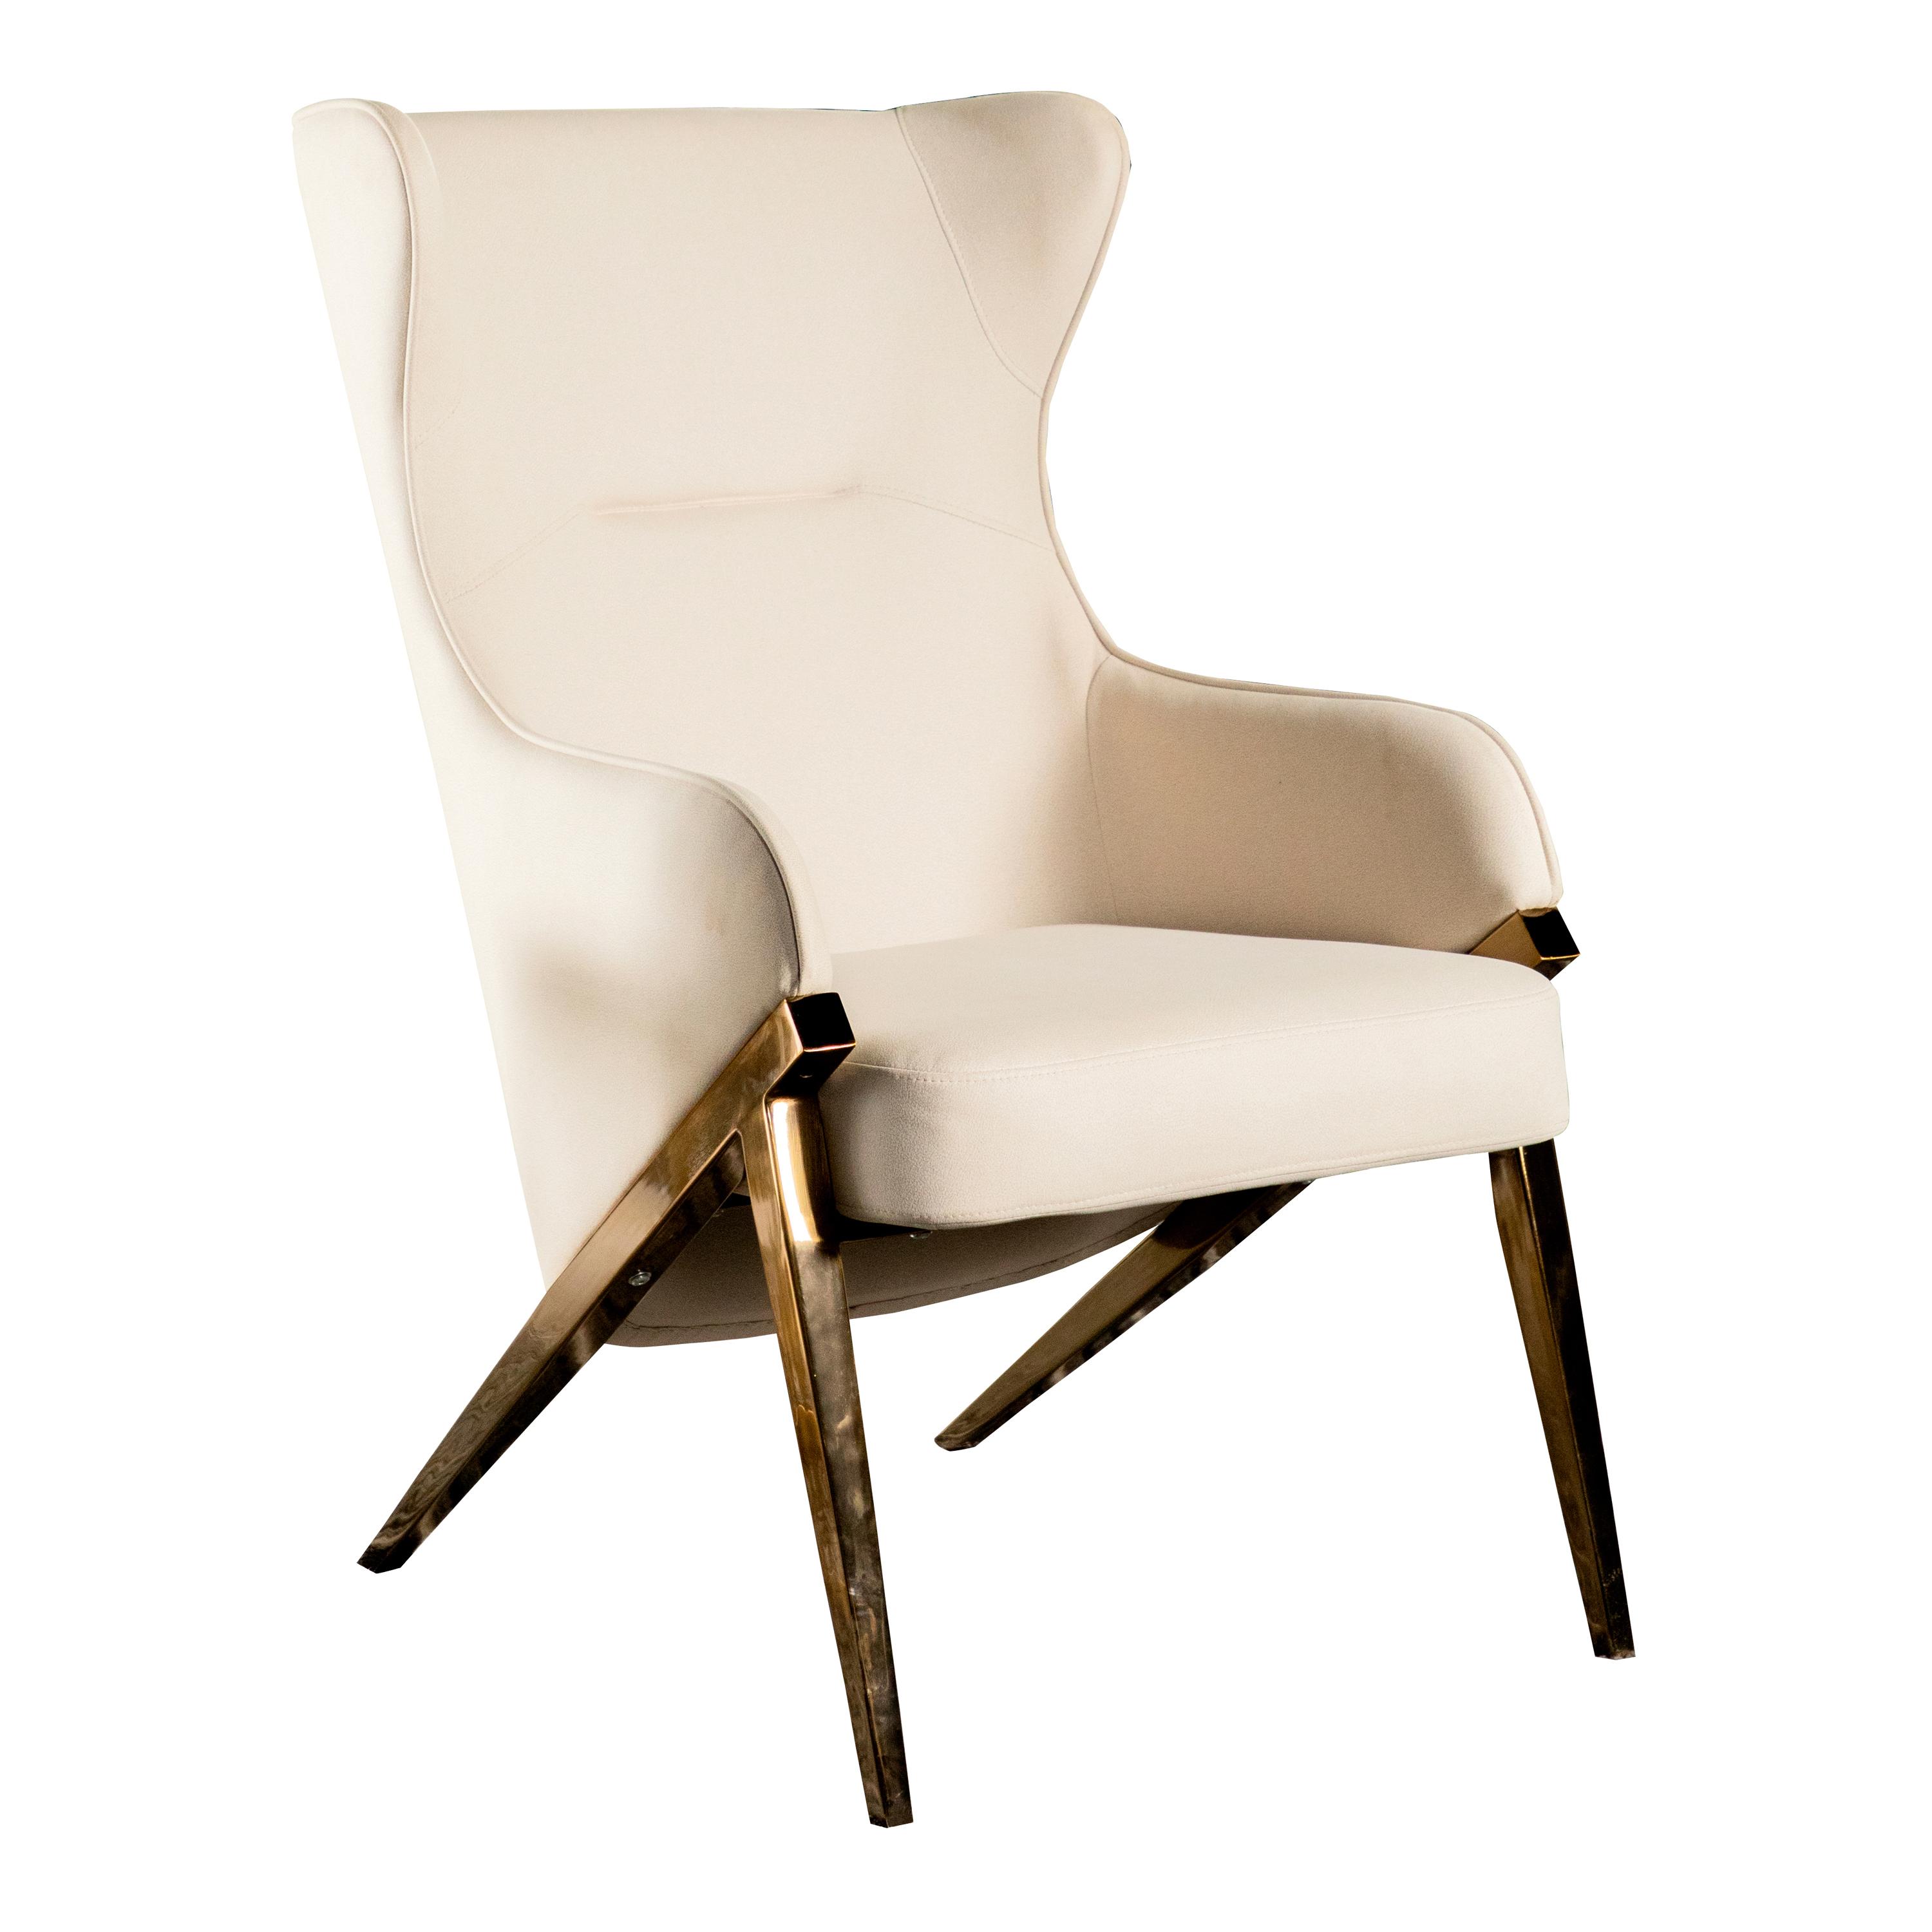 Modern Accent Chair 903052 903052 in Cream Leatherette